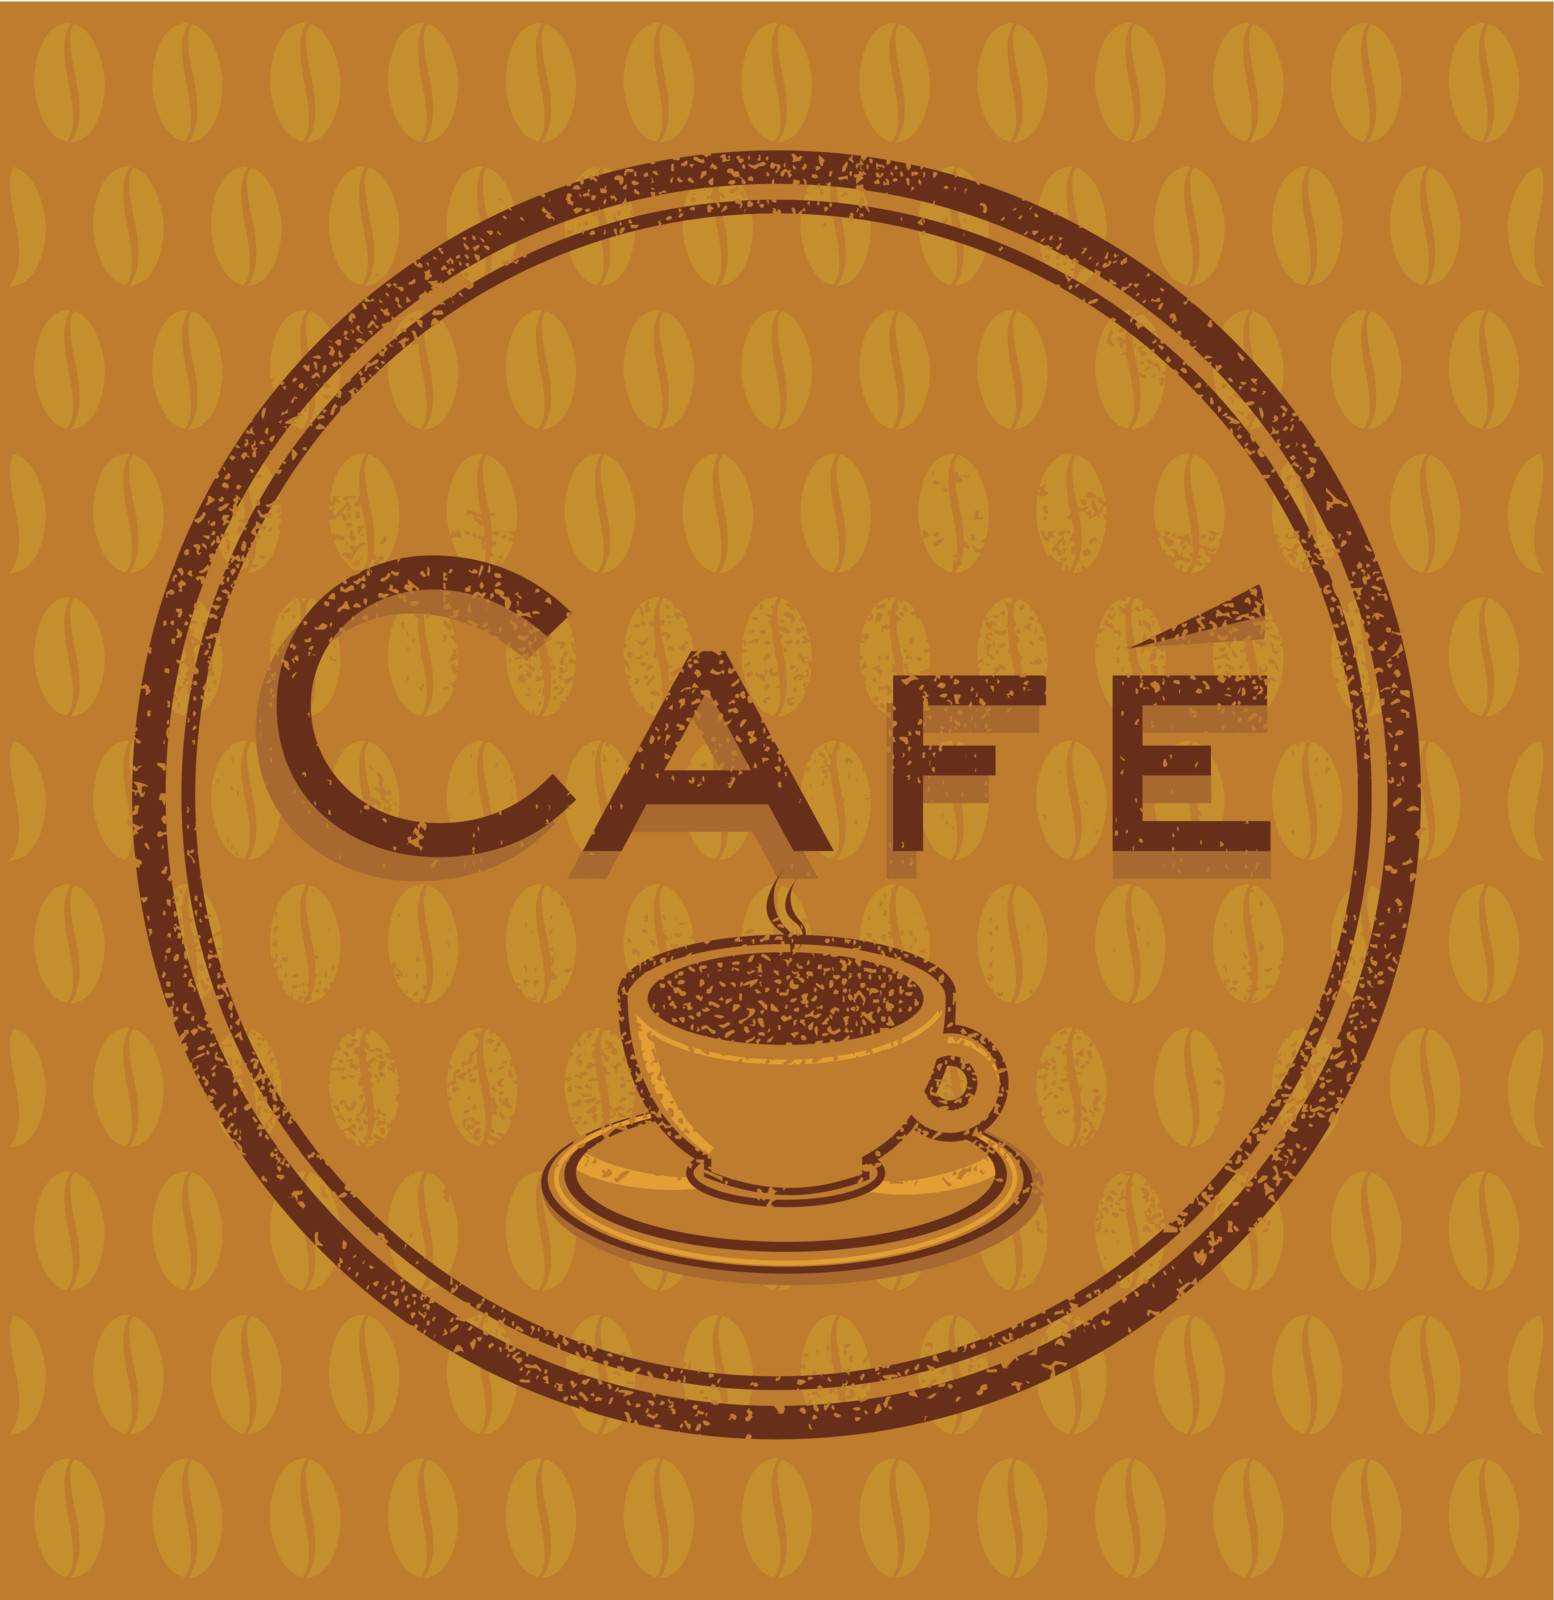 Coffeehouse Cafe sign by scusi